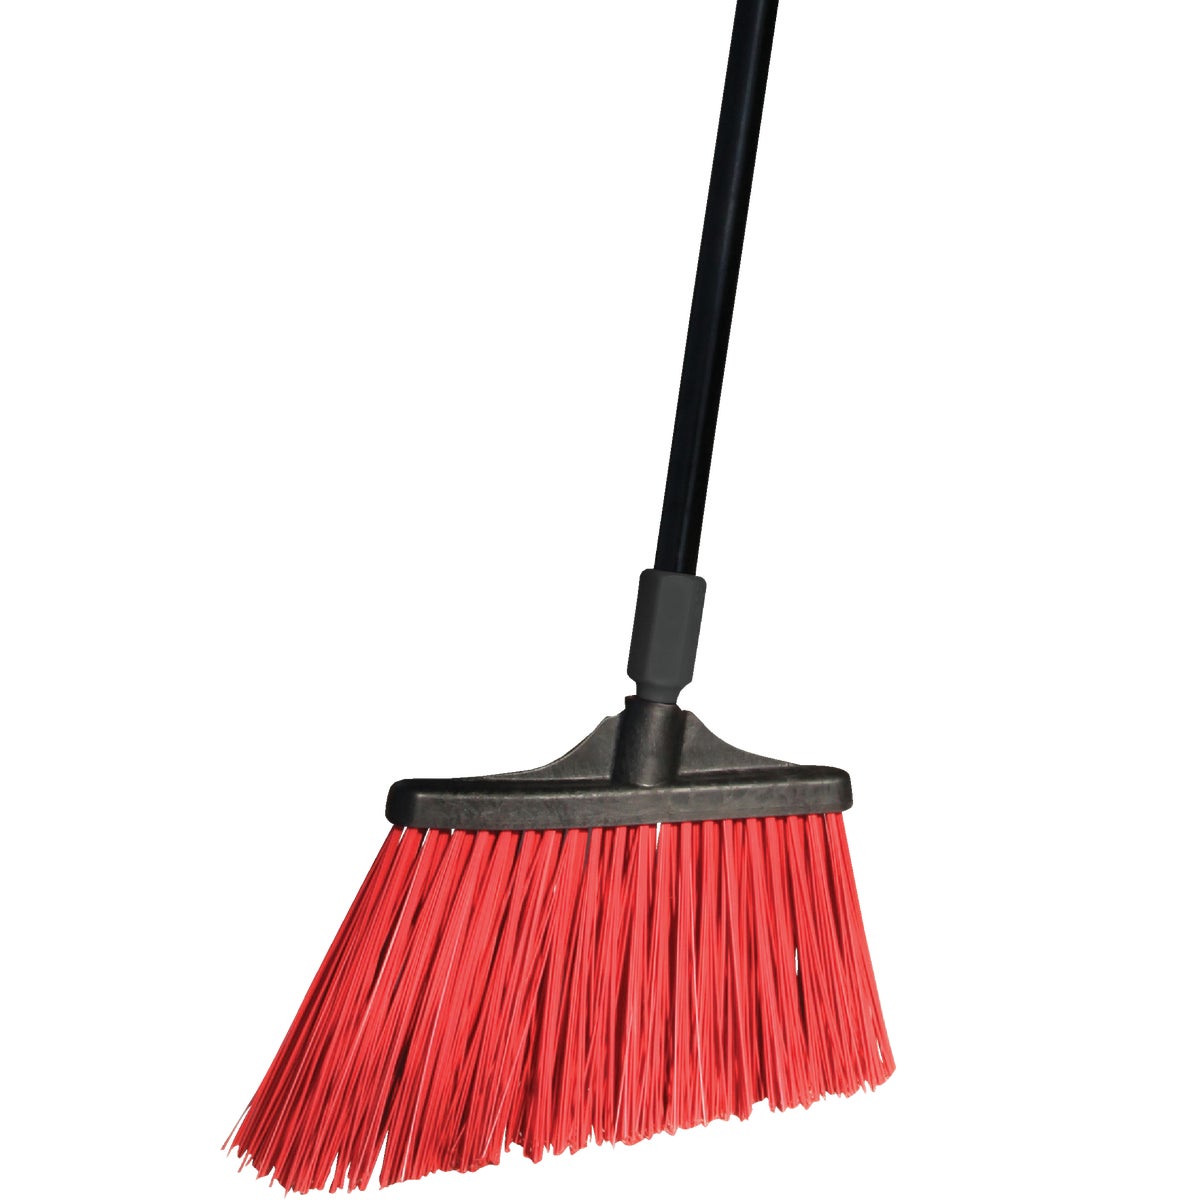 O-Cedar MaxiStrong 13 In. W. x 56 In. L. Metal Handle Angle Household Broom